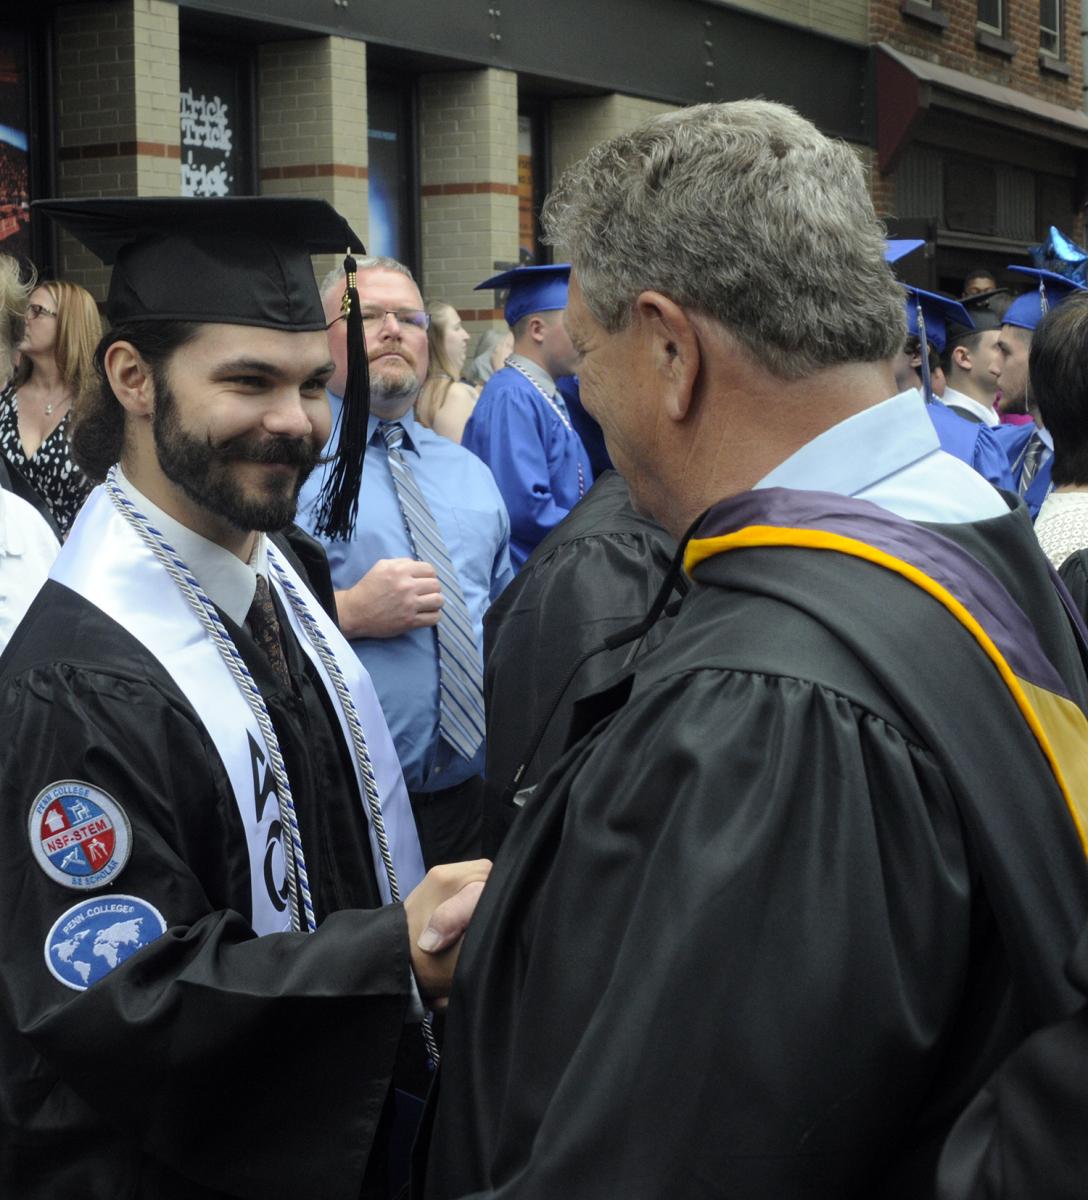 Retiring after a near-34-year career, Marc E. Bridgens – associate professor of HVAC technology – was surrounded by students Saturday afternoon. Among them was Carter J. Simcox, who graduated in building science & sustainable design: architectural technology concentration ... 